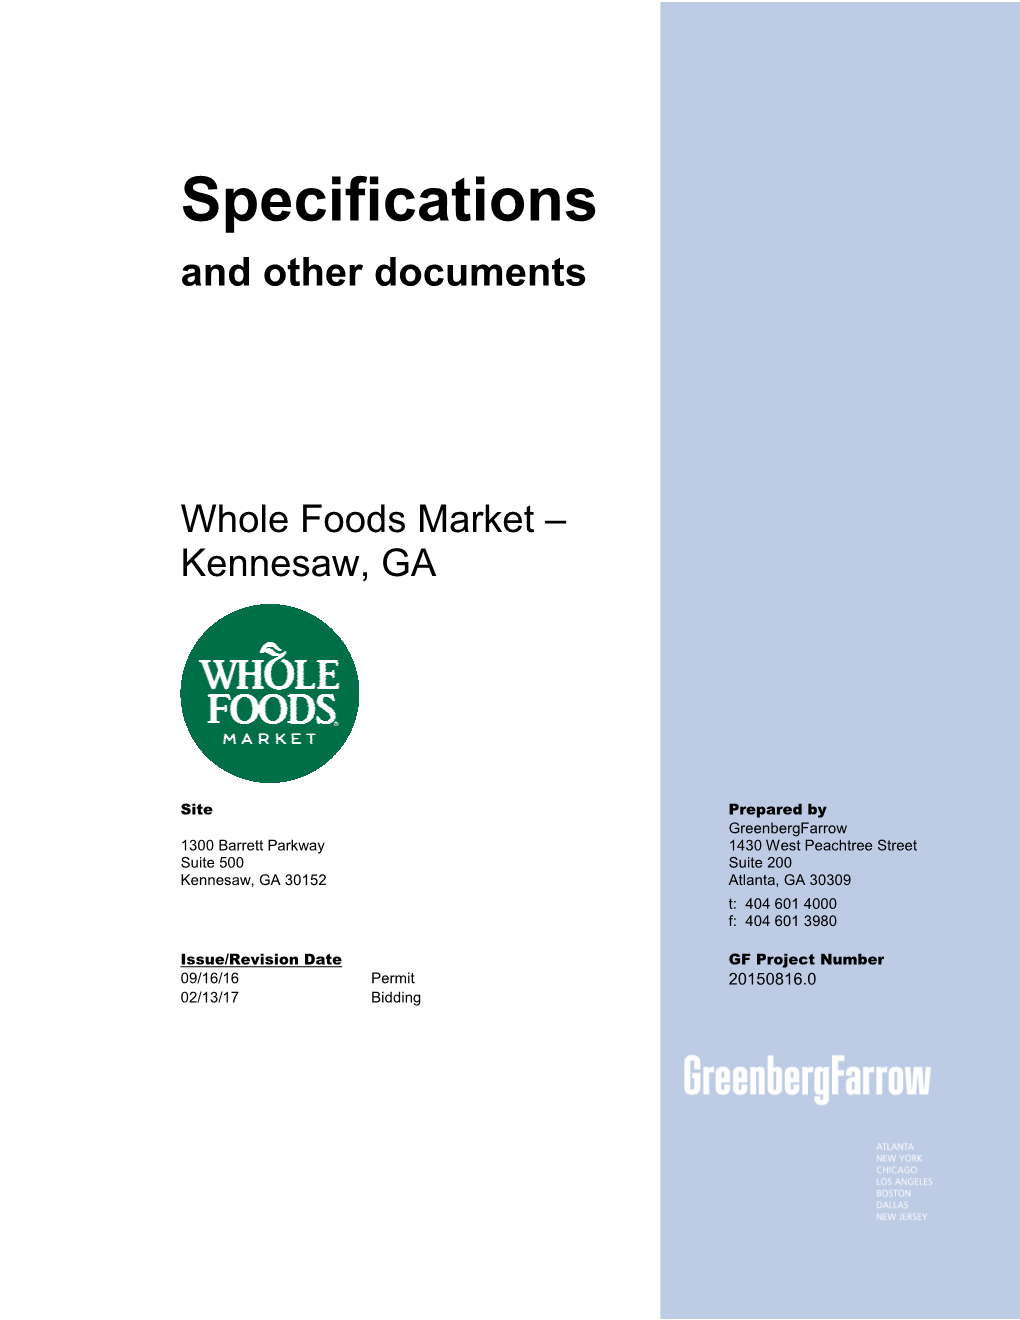 Specifications and Other Documents